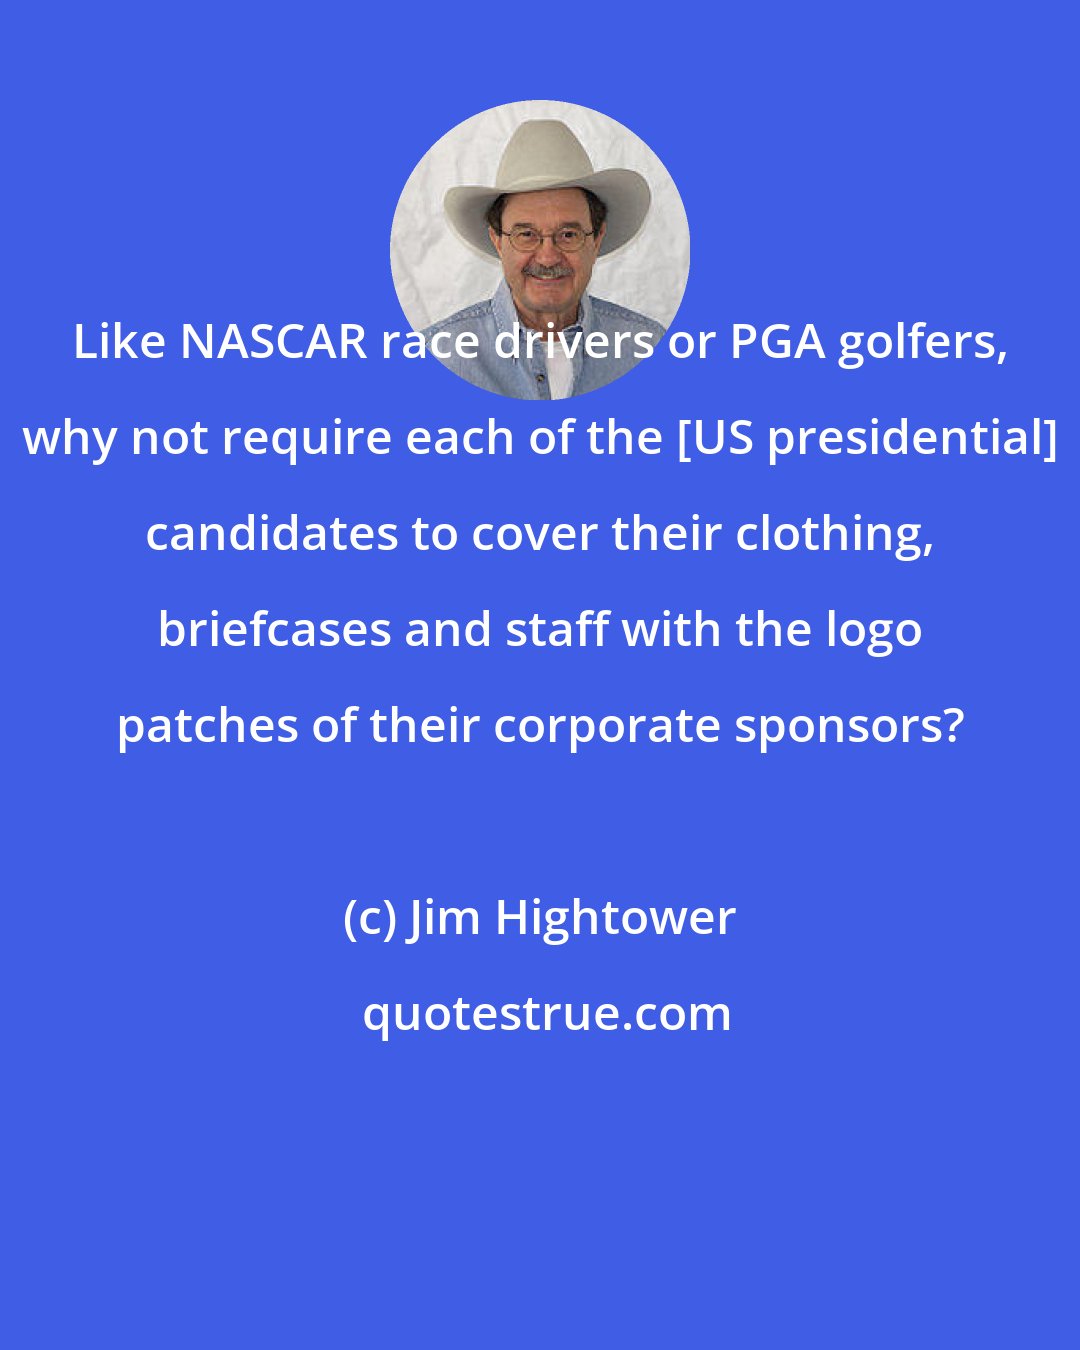 Jim Hightower: Like NASCAR race drivers or PGA golfers, why not require each of the [US presidential] candidates to cover their clothing, briefcases and staff with the logo patches of their corporate sponsors?